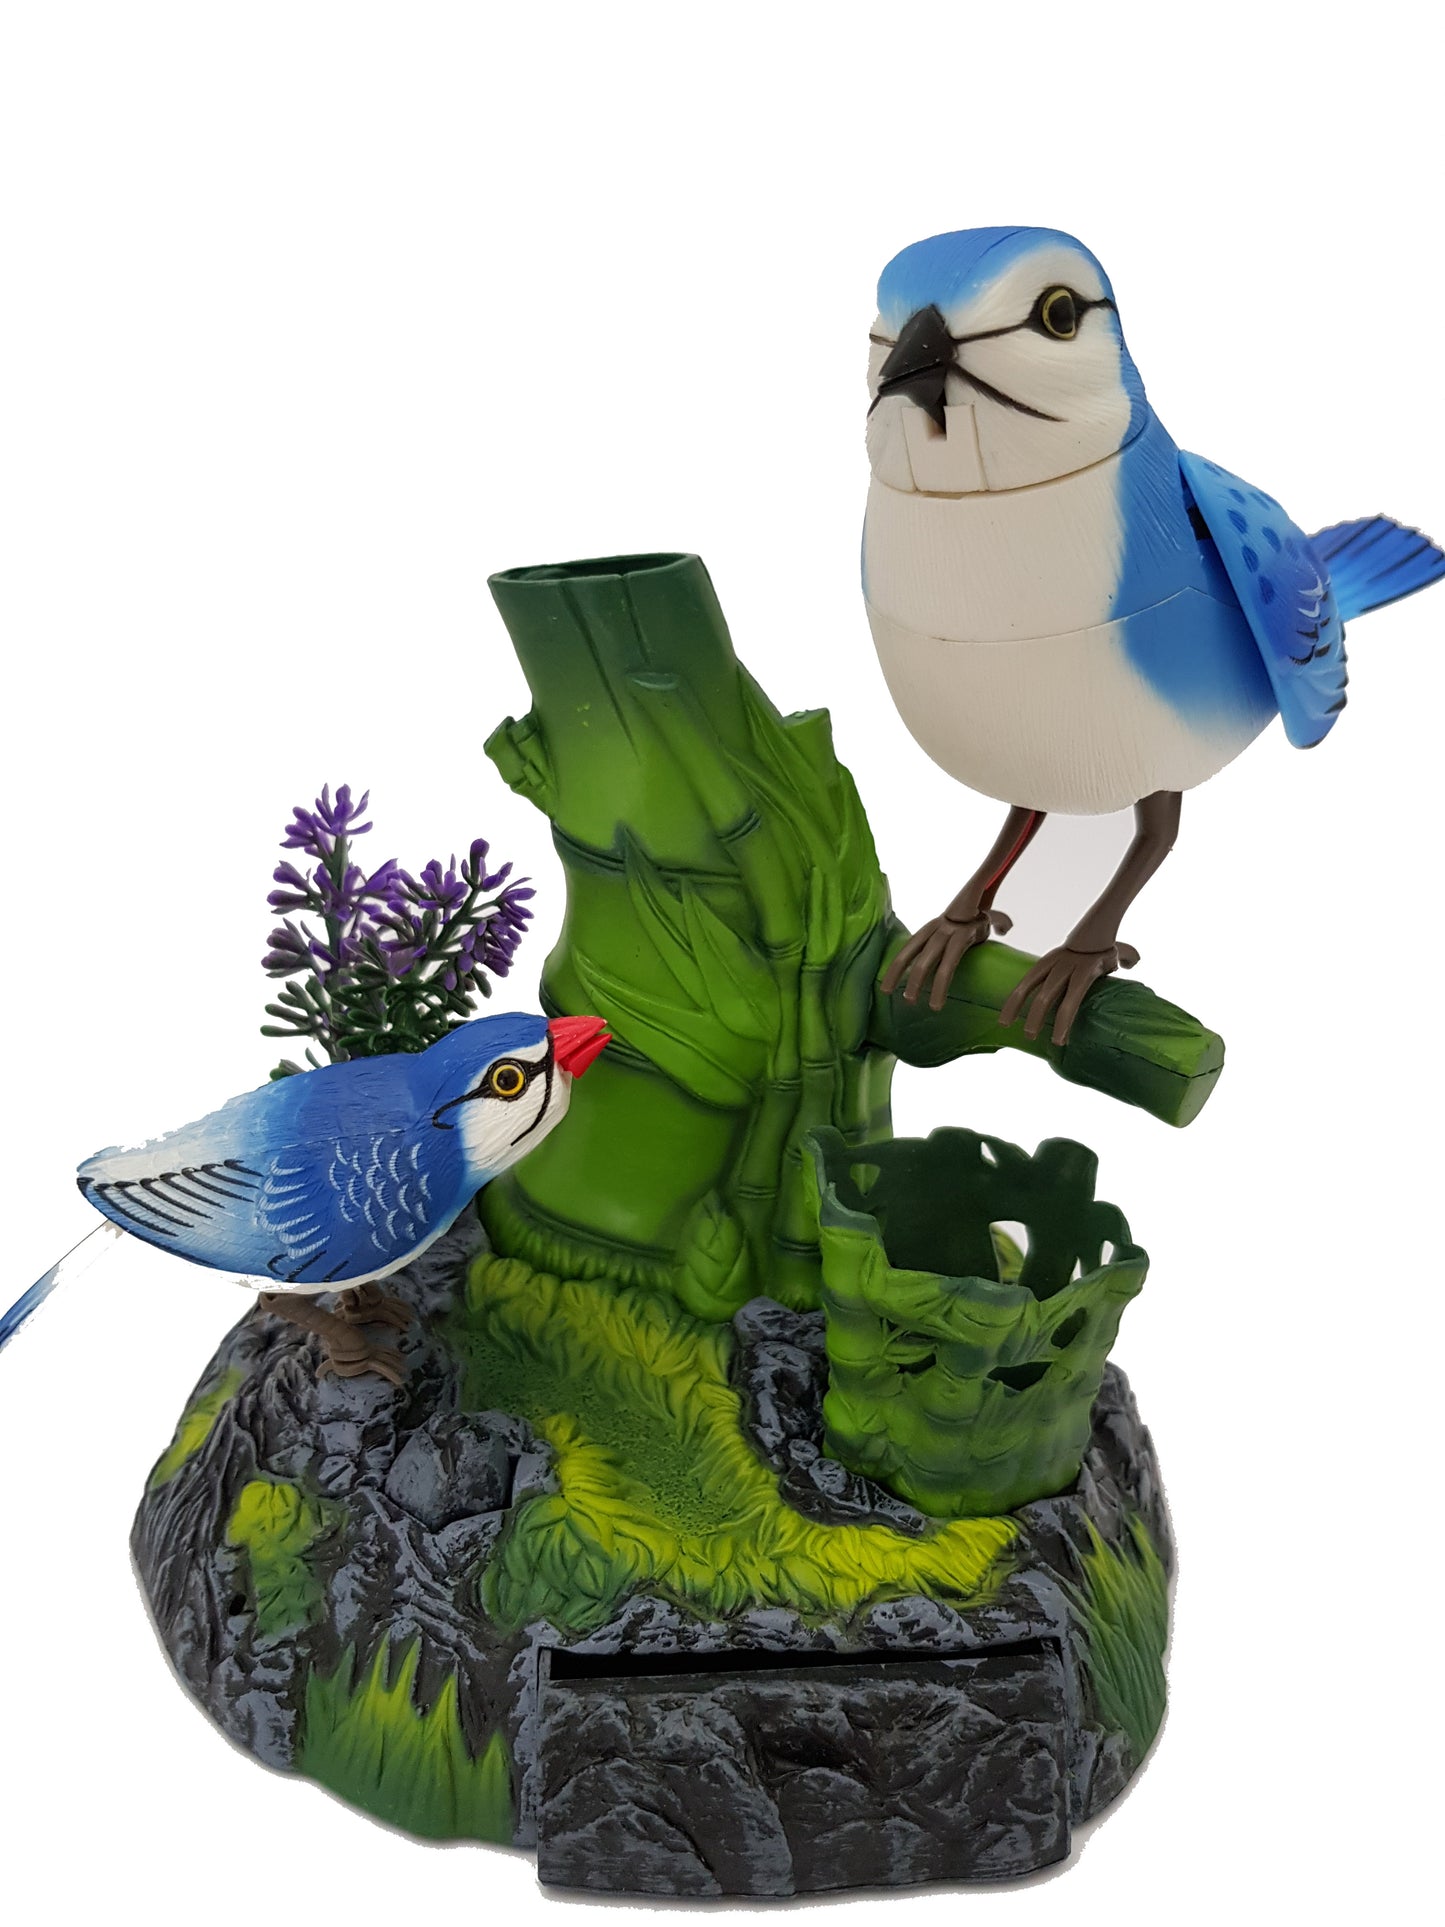 2 Blue Birds Sound and Touch Control Function Singing Bird Electric Bird Pets Pen Pencil Holder Christmas Birthday Gift for Kids